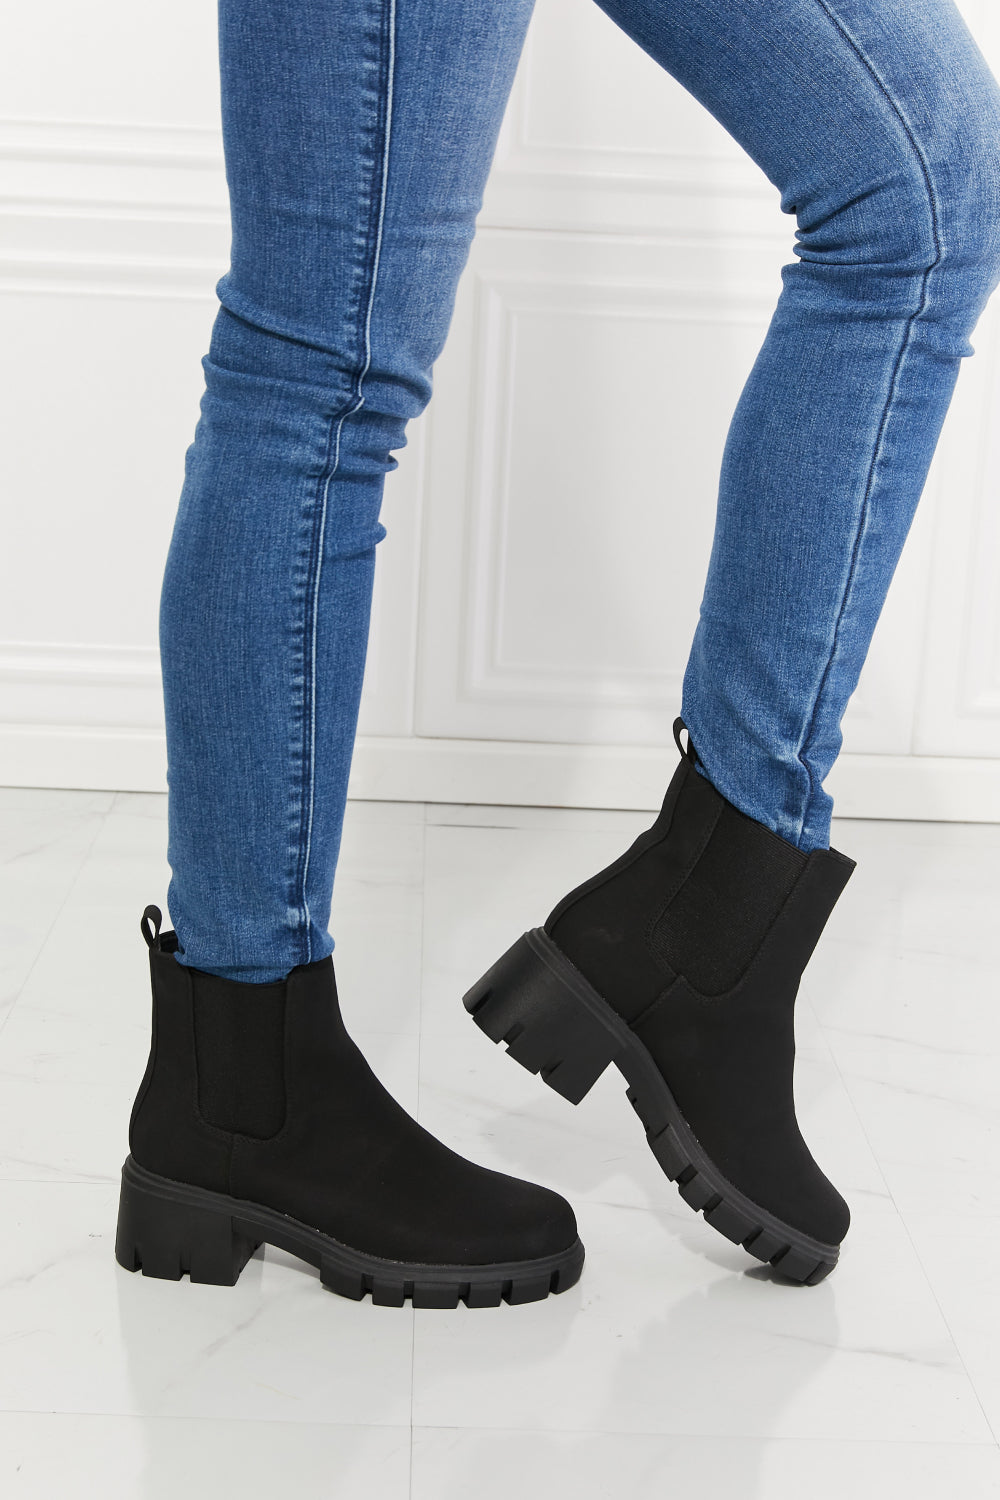 MMShoes Work For It Matte Lug Sole Chelsea Boots in Black The Stout Steer